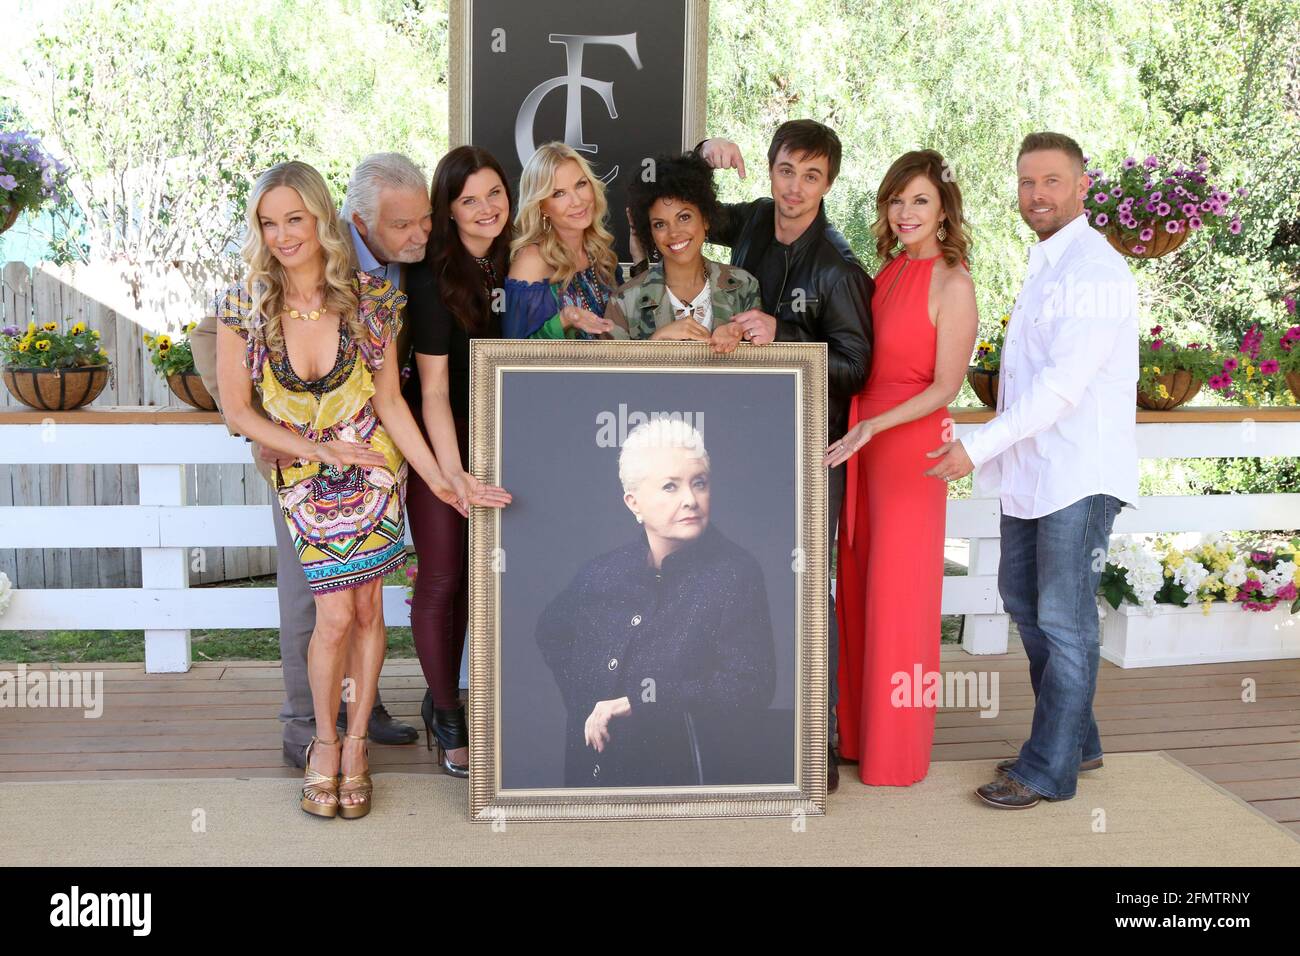 LOS ANGELES - APR 14:  Jennifer Gareis, John McCook, Heather Tom, Katherine Kelly Lang, Matt Iseman, Karla Mosley, Darin Brooks, Bobbie Eakes, Jacob Young, Susan Flannery portrait at the 'Home and Family' Celebrates 'Bold and Beautiful's' 30 Years at Universal Studios Back Lot on April 14, 2017 in Los Angeles, CA Stock Photo